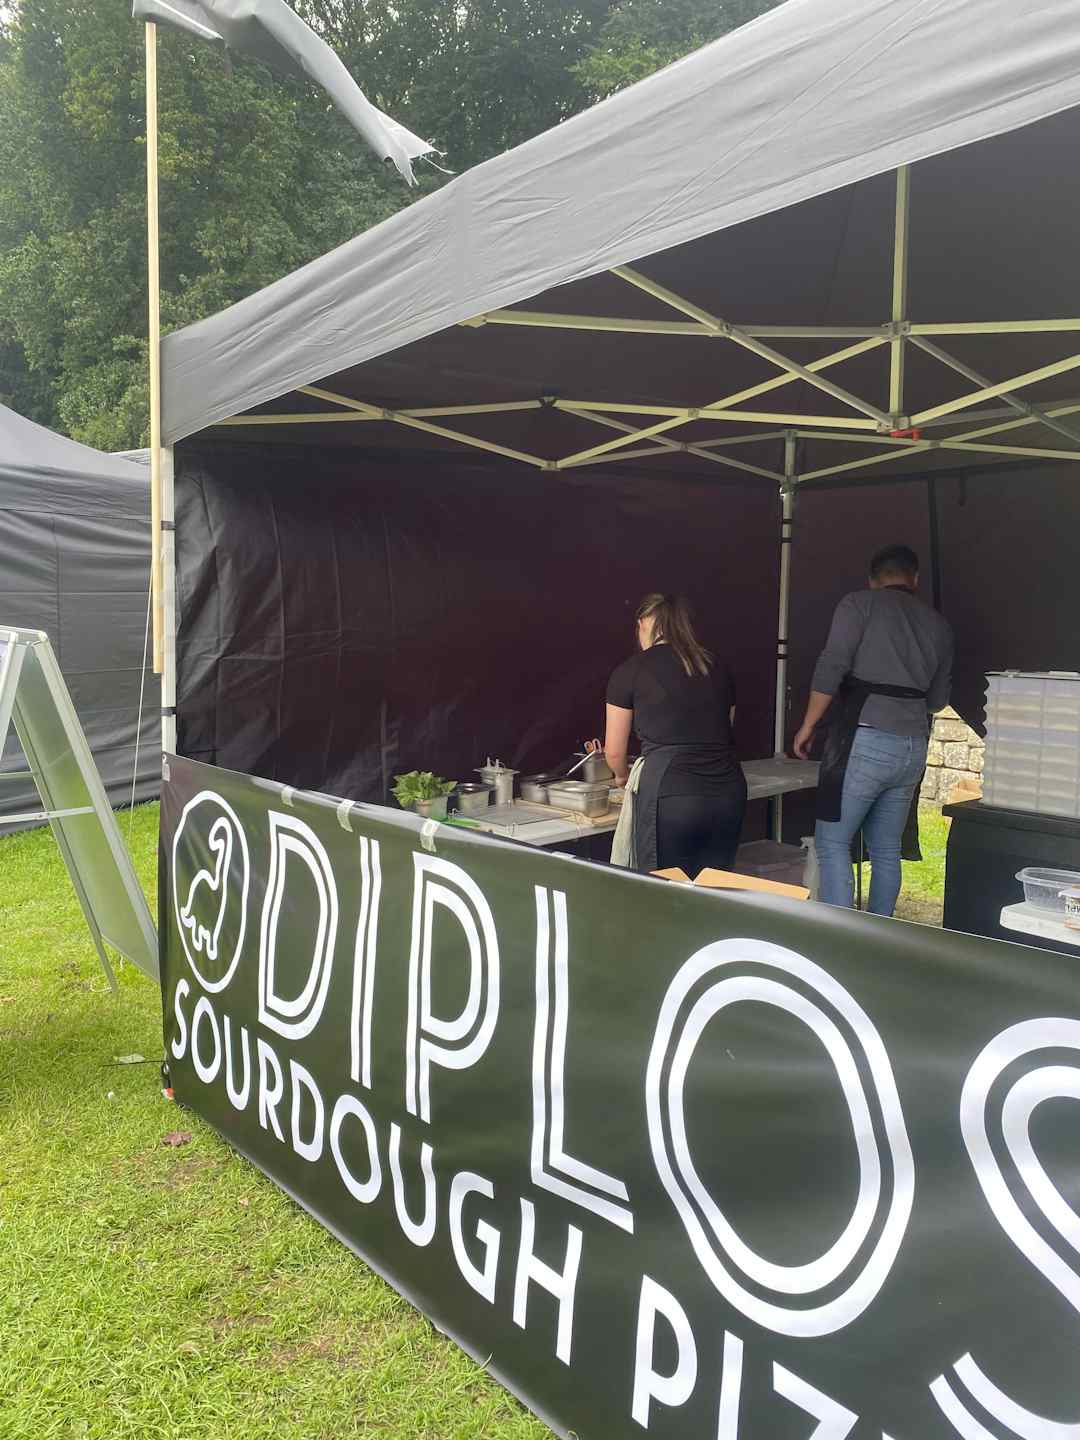 Hero image for supplier Diplos Pizza Events